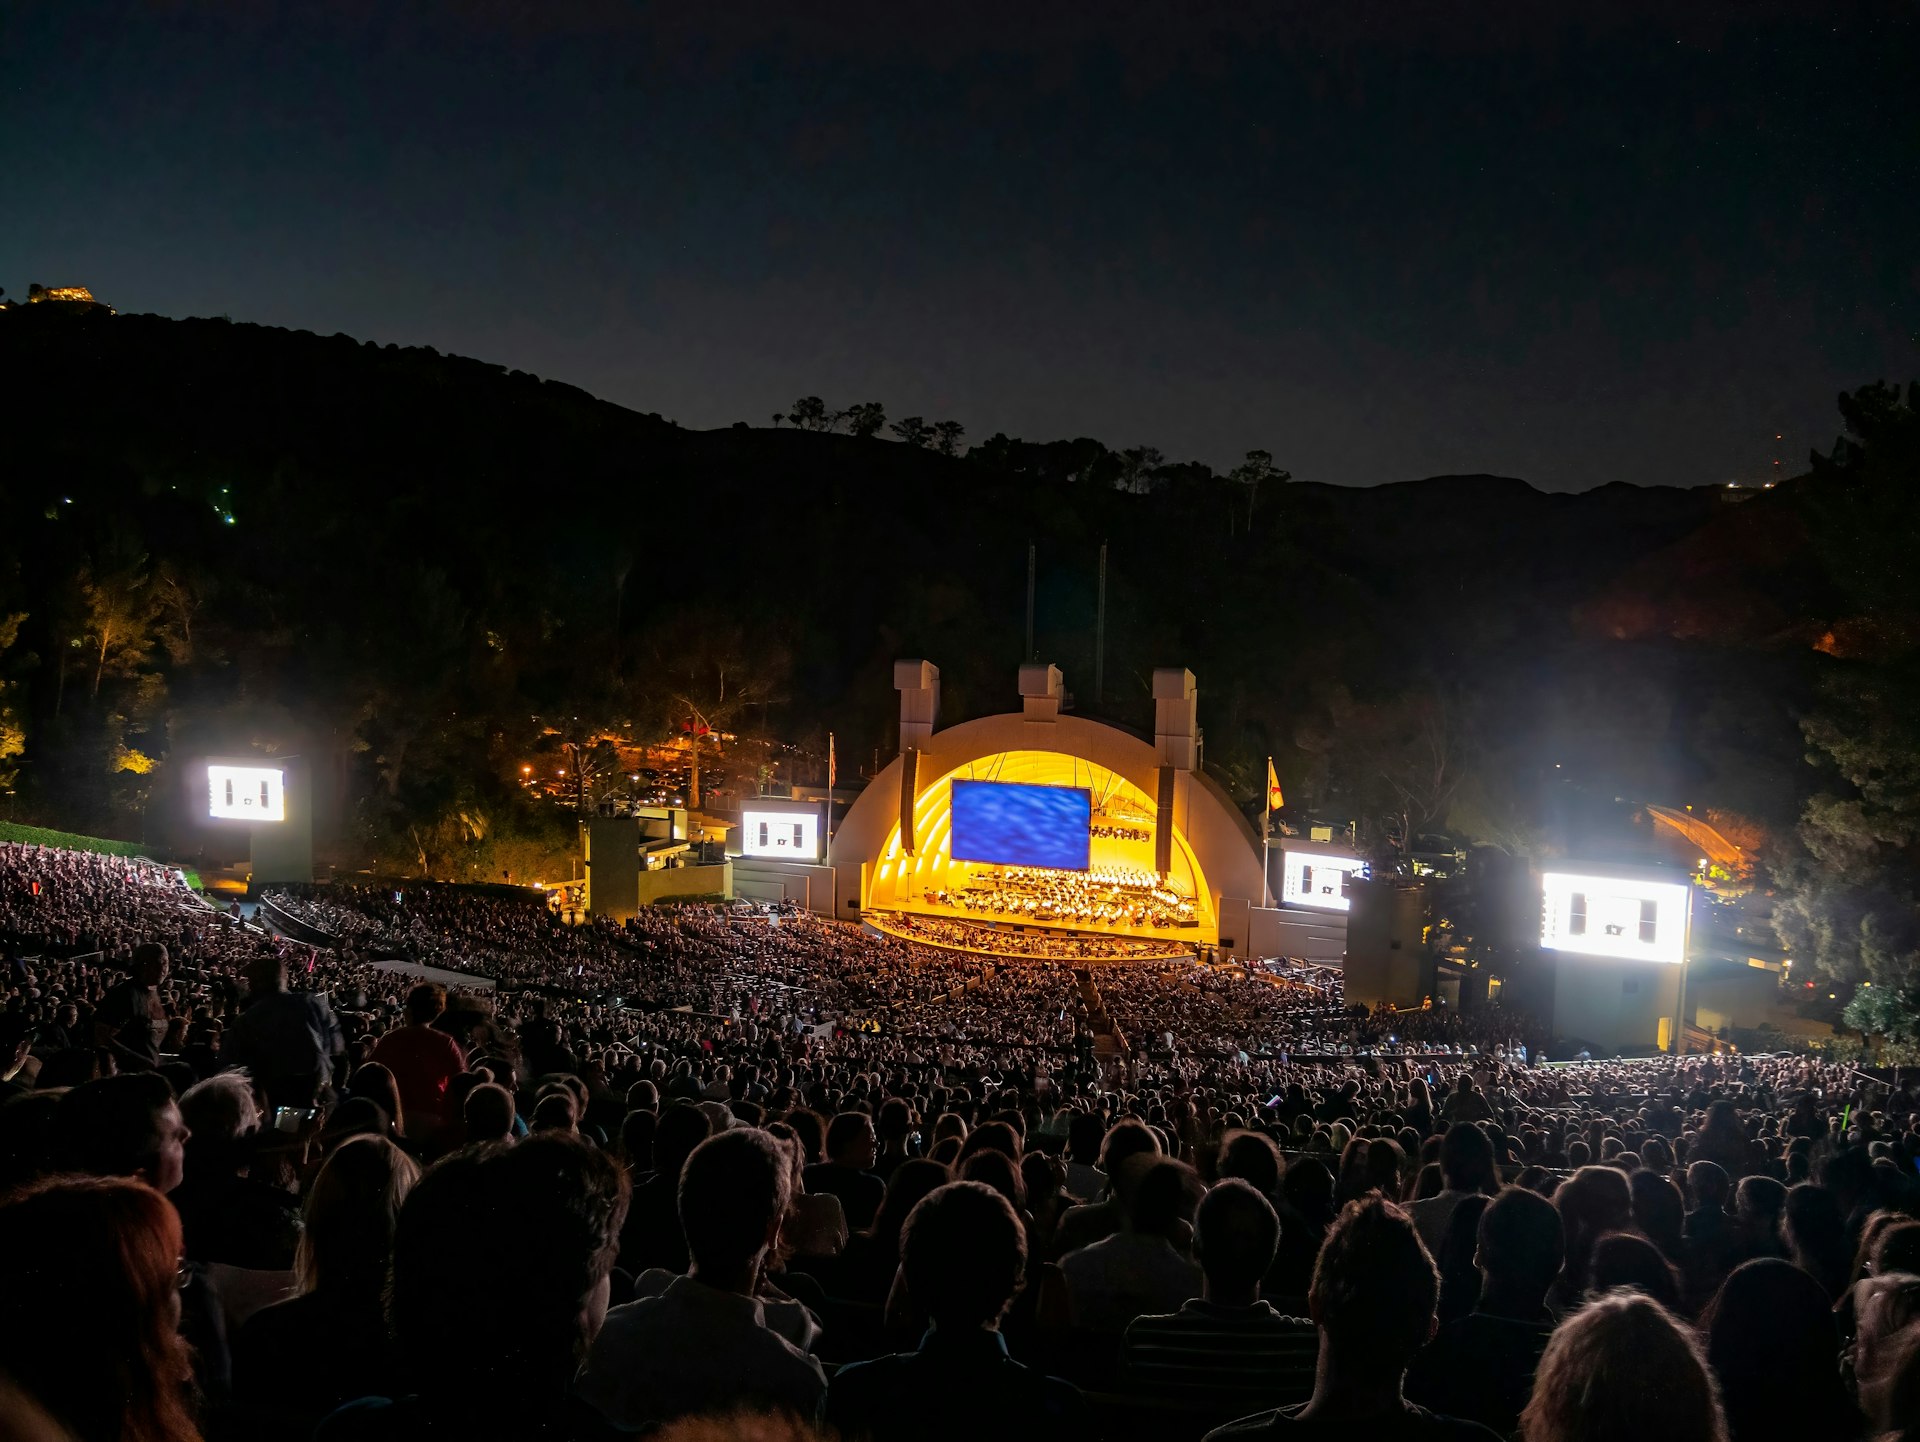 An outdoor evening concert at the Hollywood Bowl, Los Angeles, California, USA